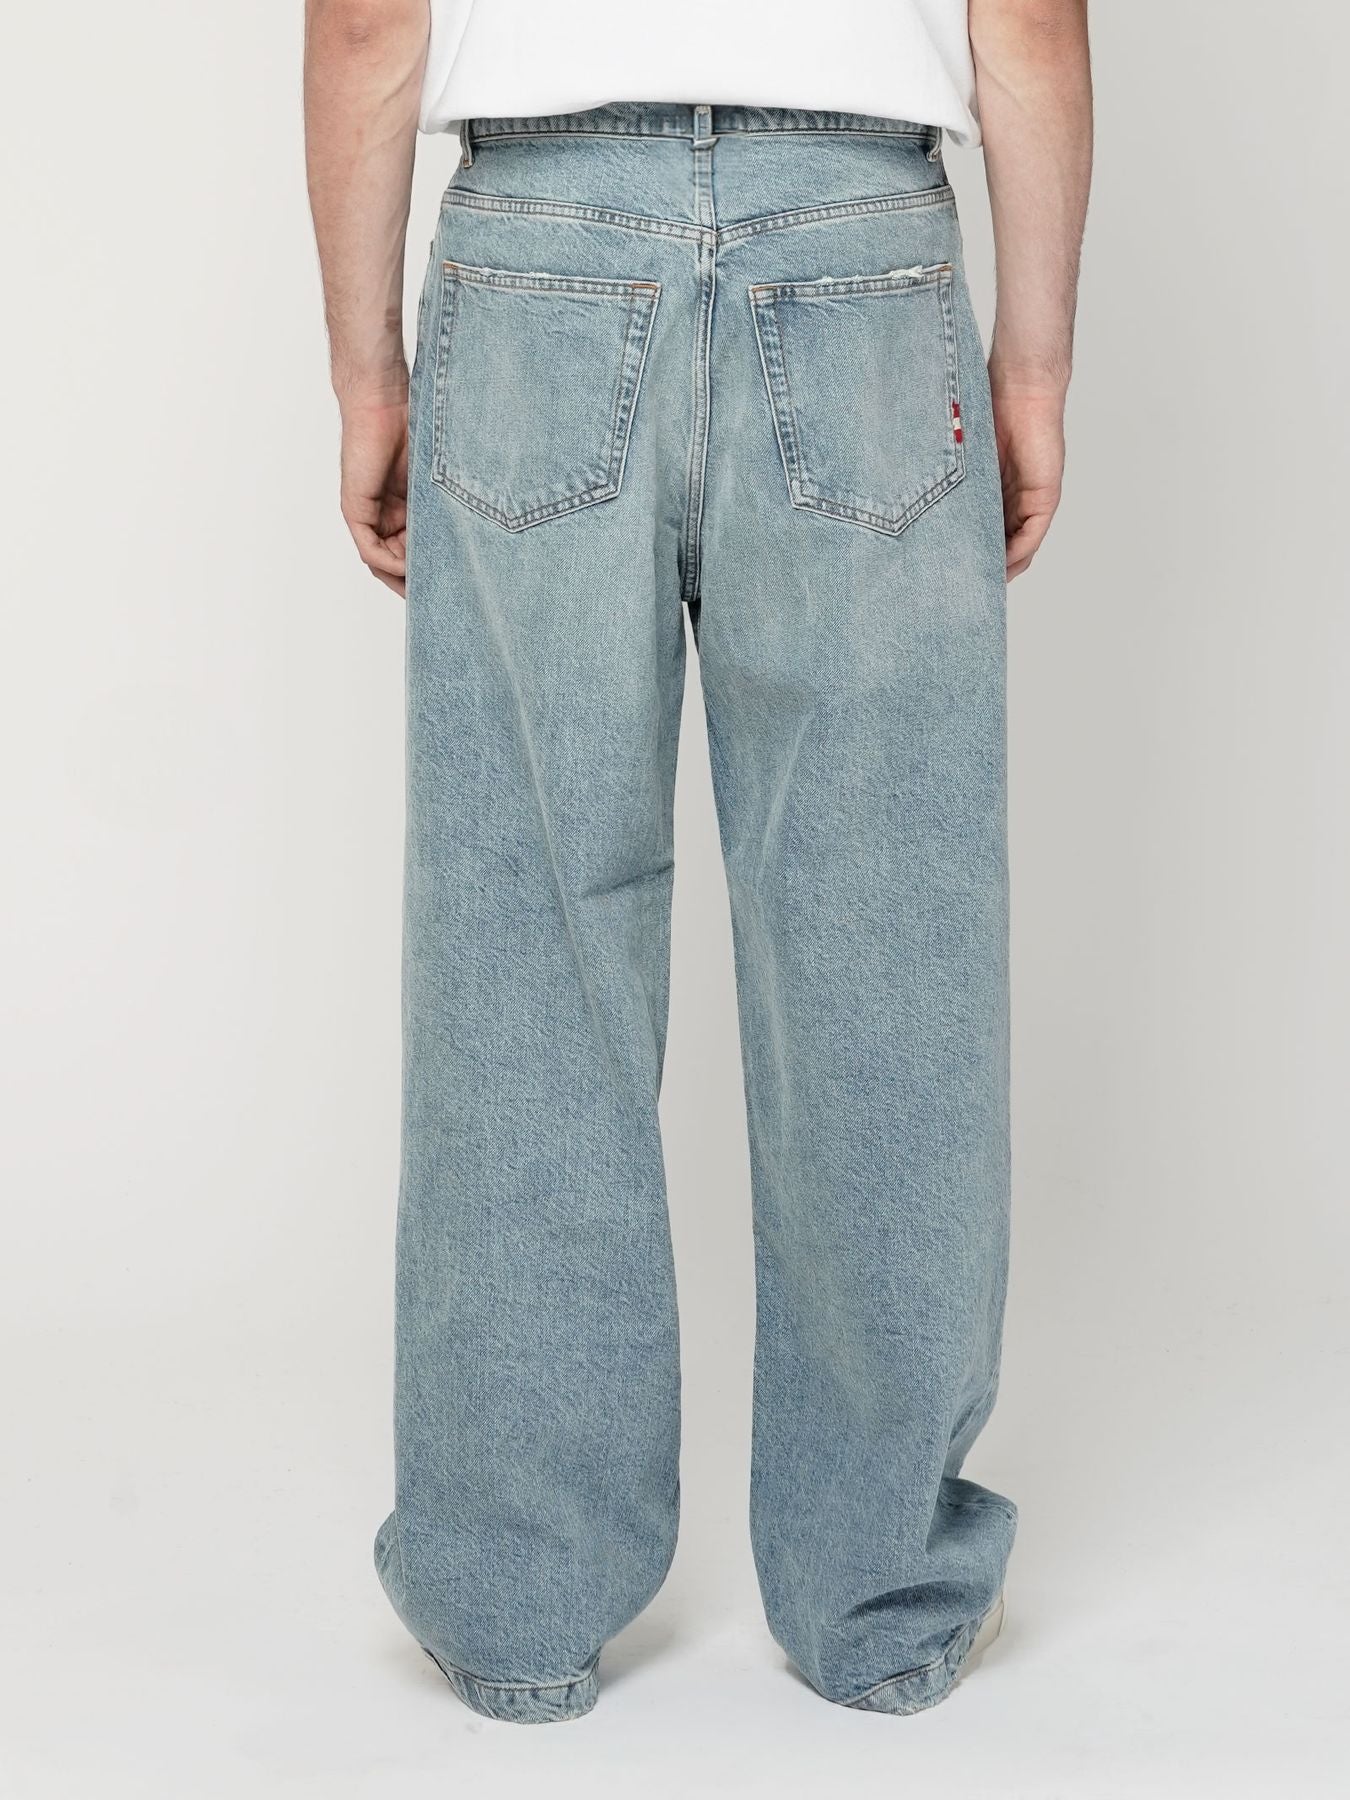 AMISH JEANS WIDE